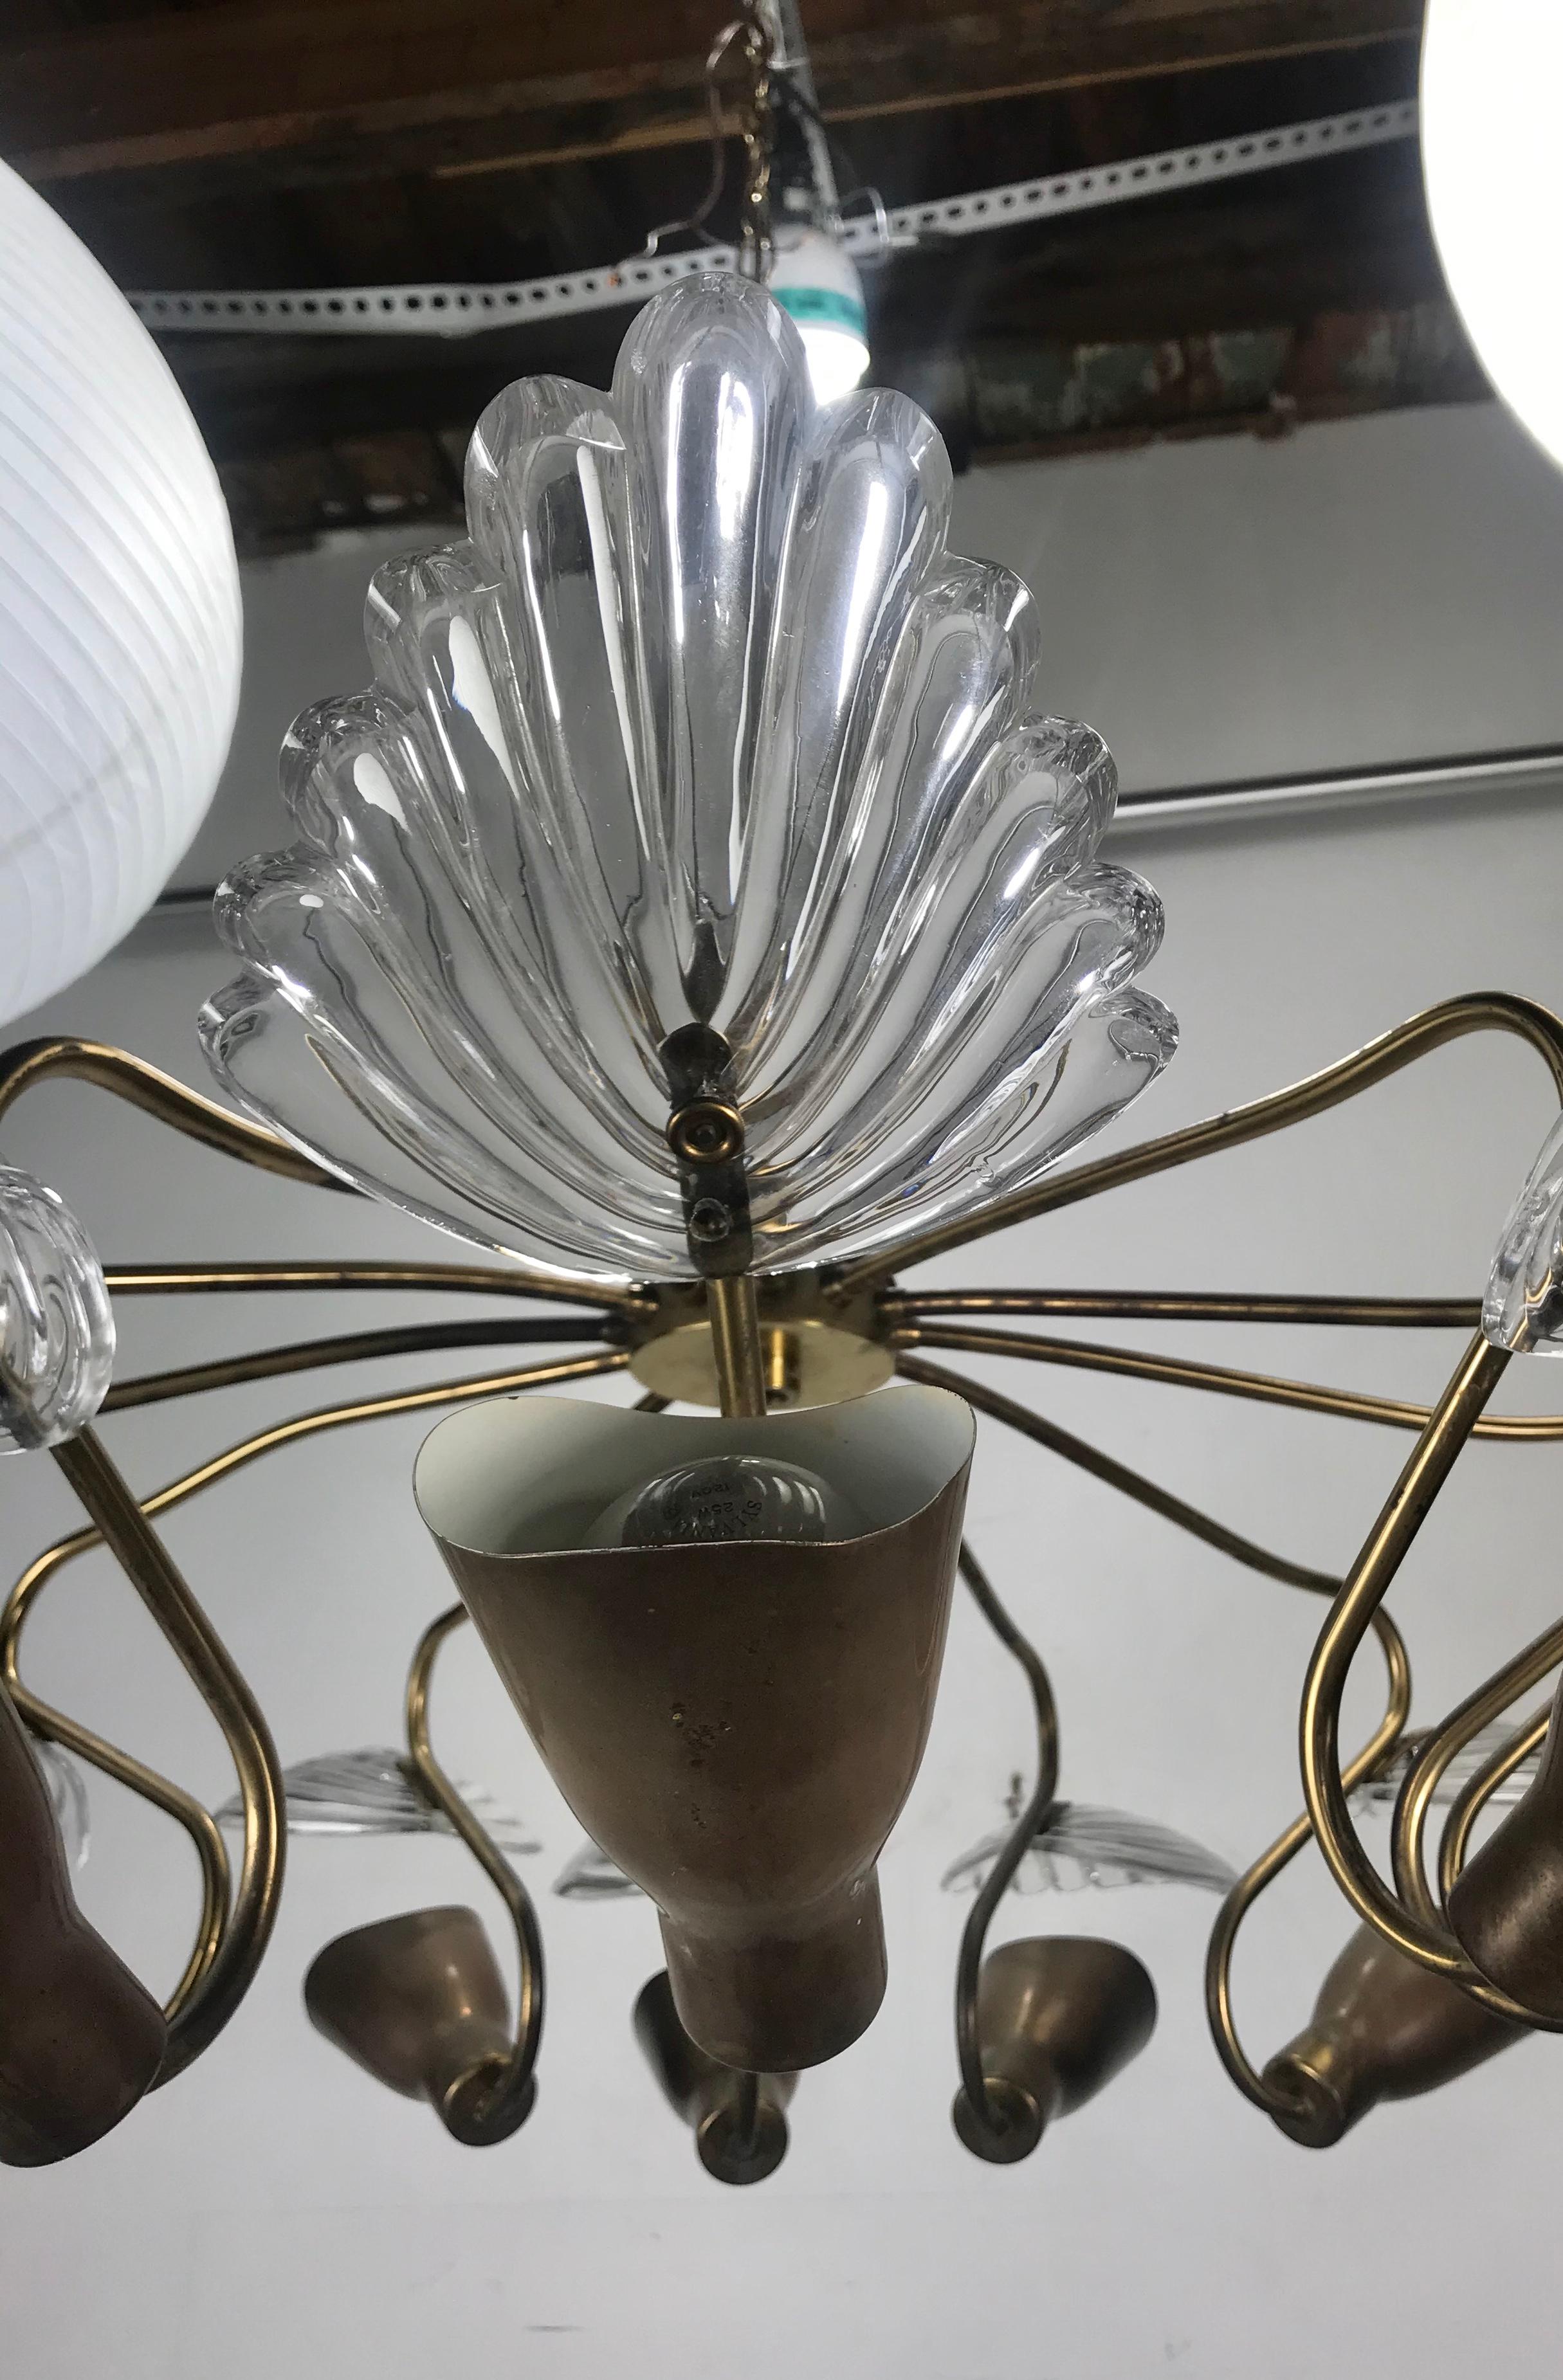 Large Italian modernist 12-arm chandelier, attributed to Stilnovo, Elegant design with flowing brass arms and glass fans, palms, amazing quality and construction, would enhance any modern, antique, eclectic environment, hand delivery avail to New